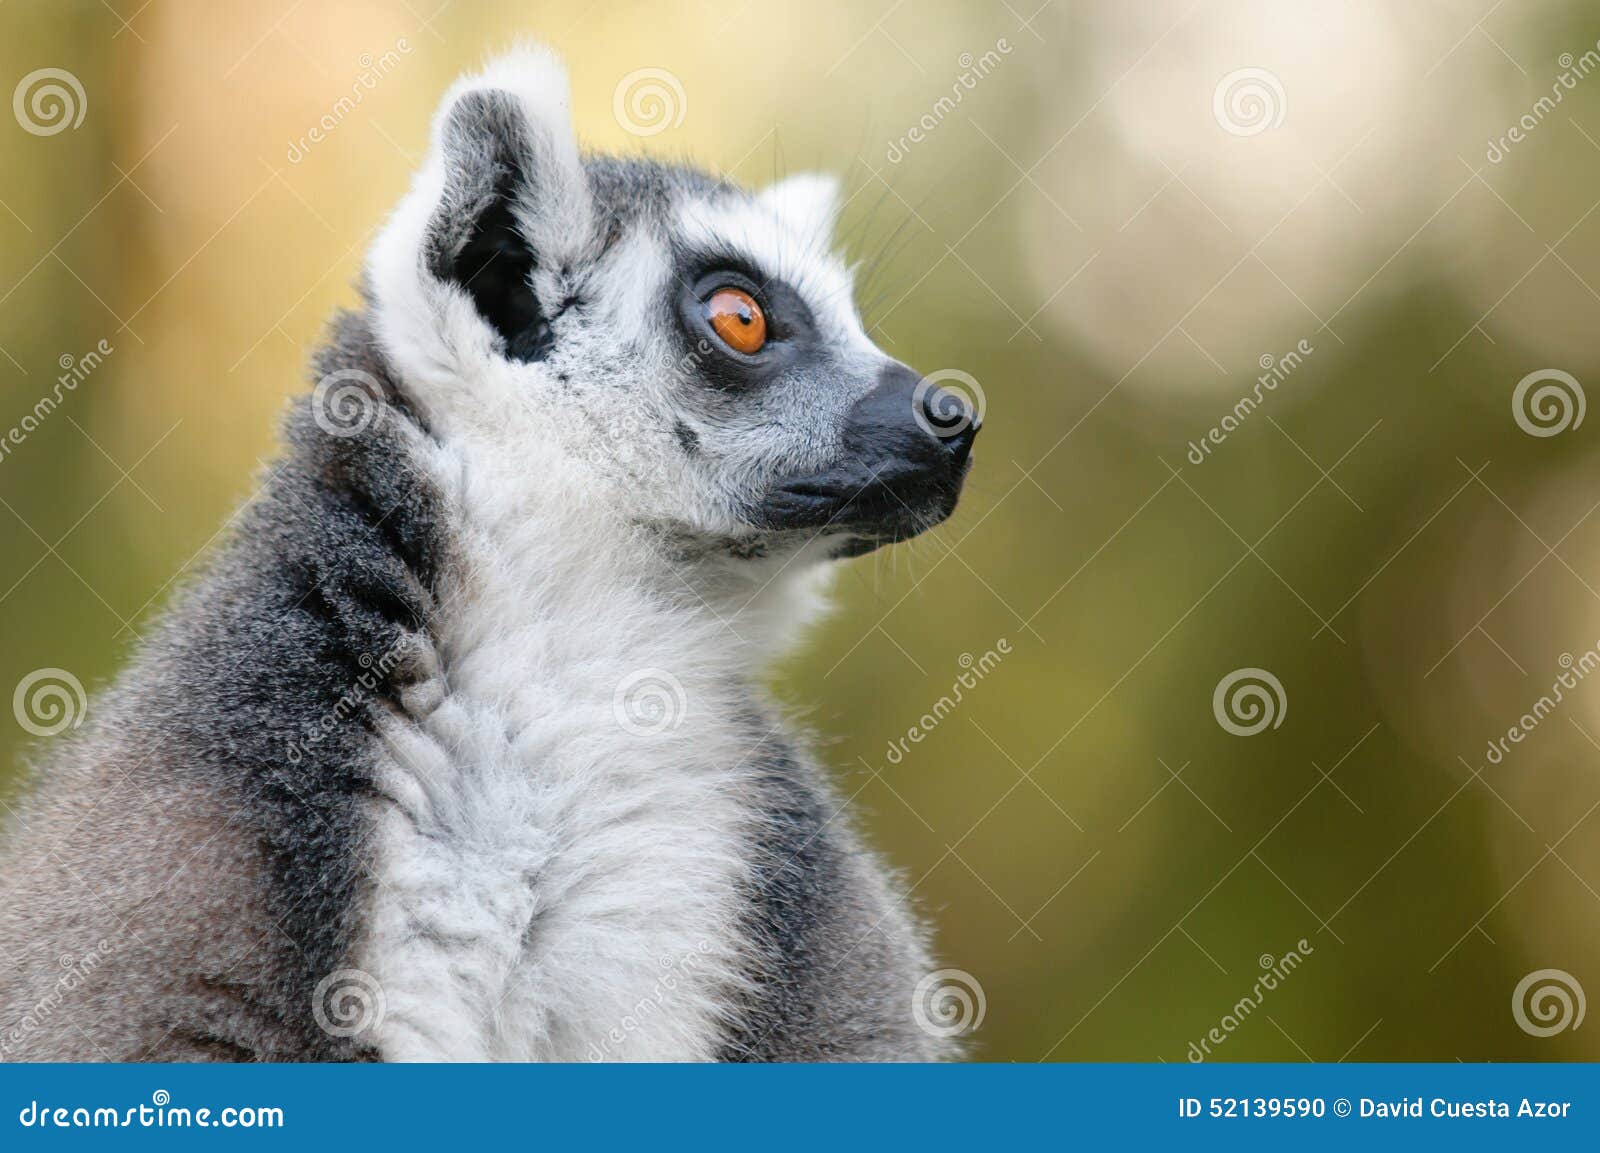 ring-tailed lemur portrait with bokeh background.